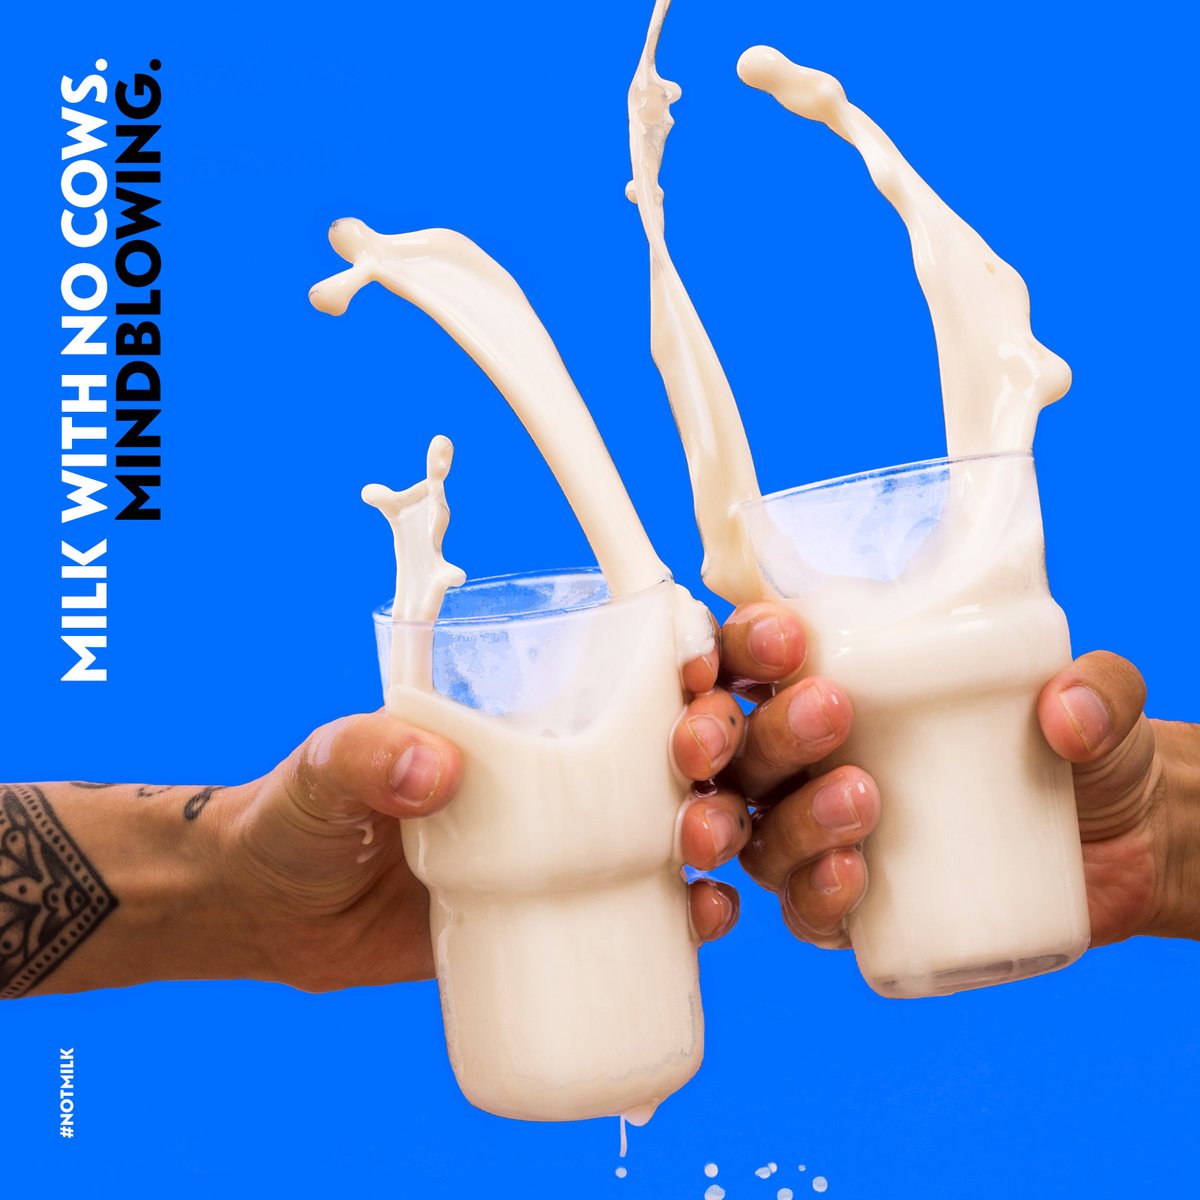 Cheers to a world where you can enjoy the taste of milk without ever involving a 🐄. Enjoy NotMilk™ and never miss the tastes you grew up with! ✖️🥛